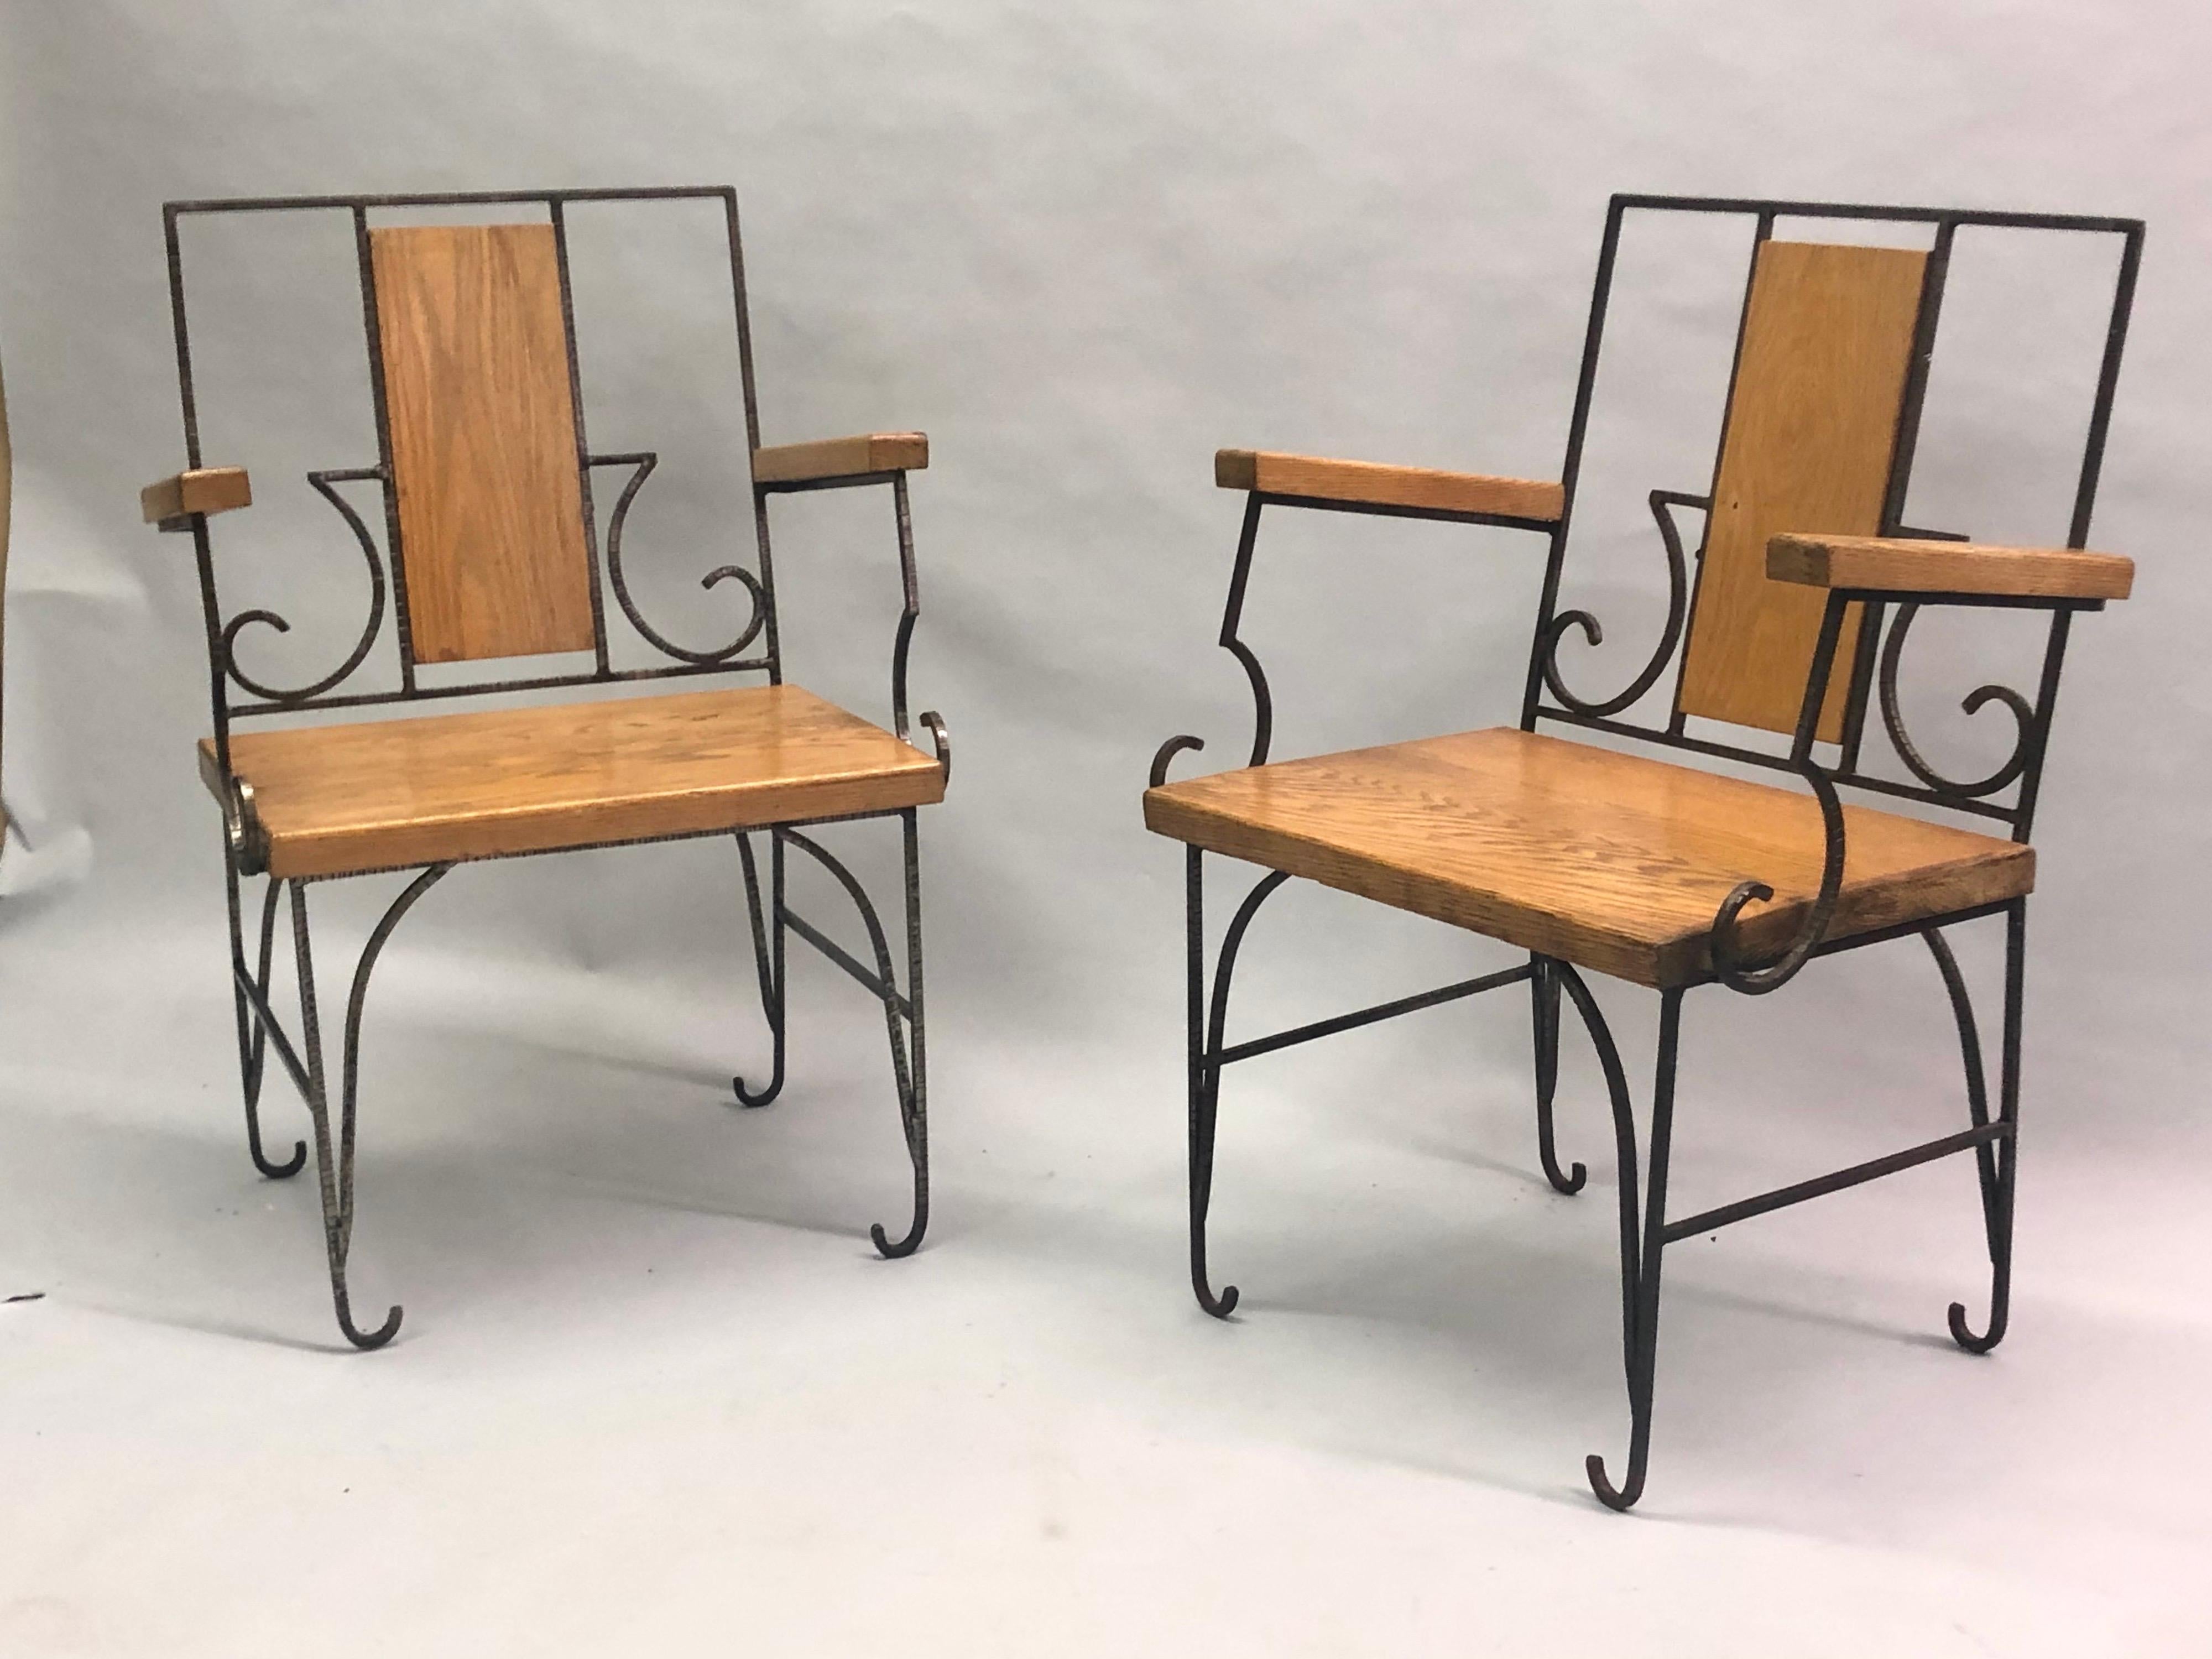 Elegant Pair of French Mid-Century Modern Neoclassical armchairs in hand hammered and chiseled wrought iron with thick, oak seats and backrests in the style of Marc Duplantier. The lounge or club chairs present a refreshing, open, transparent form